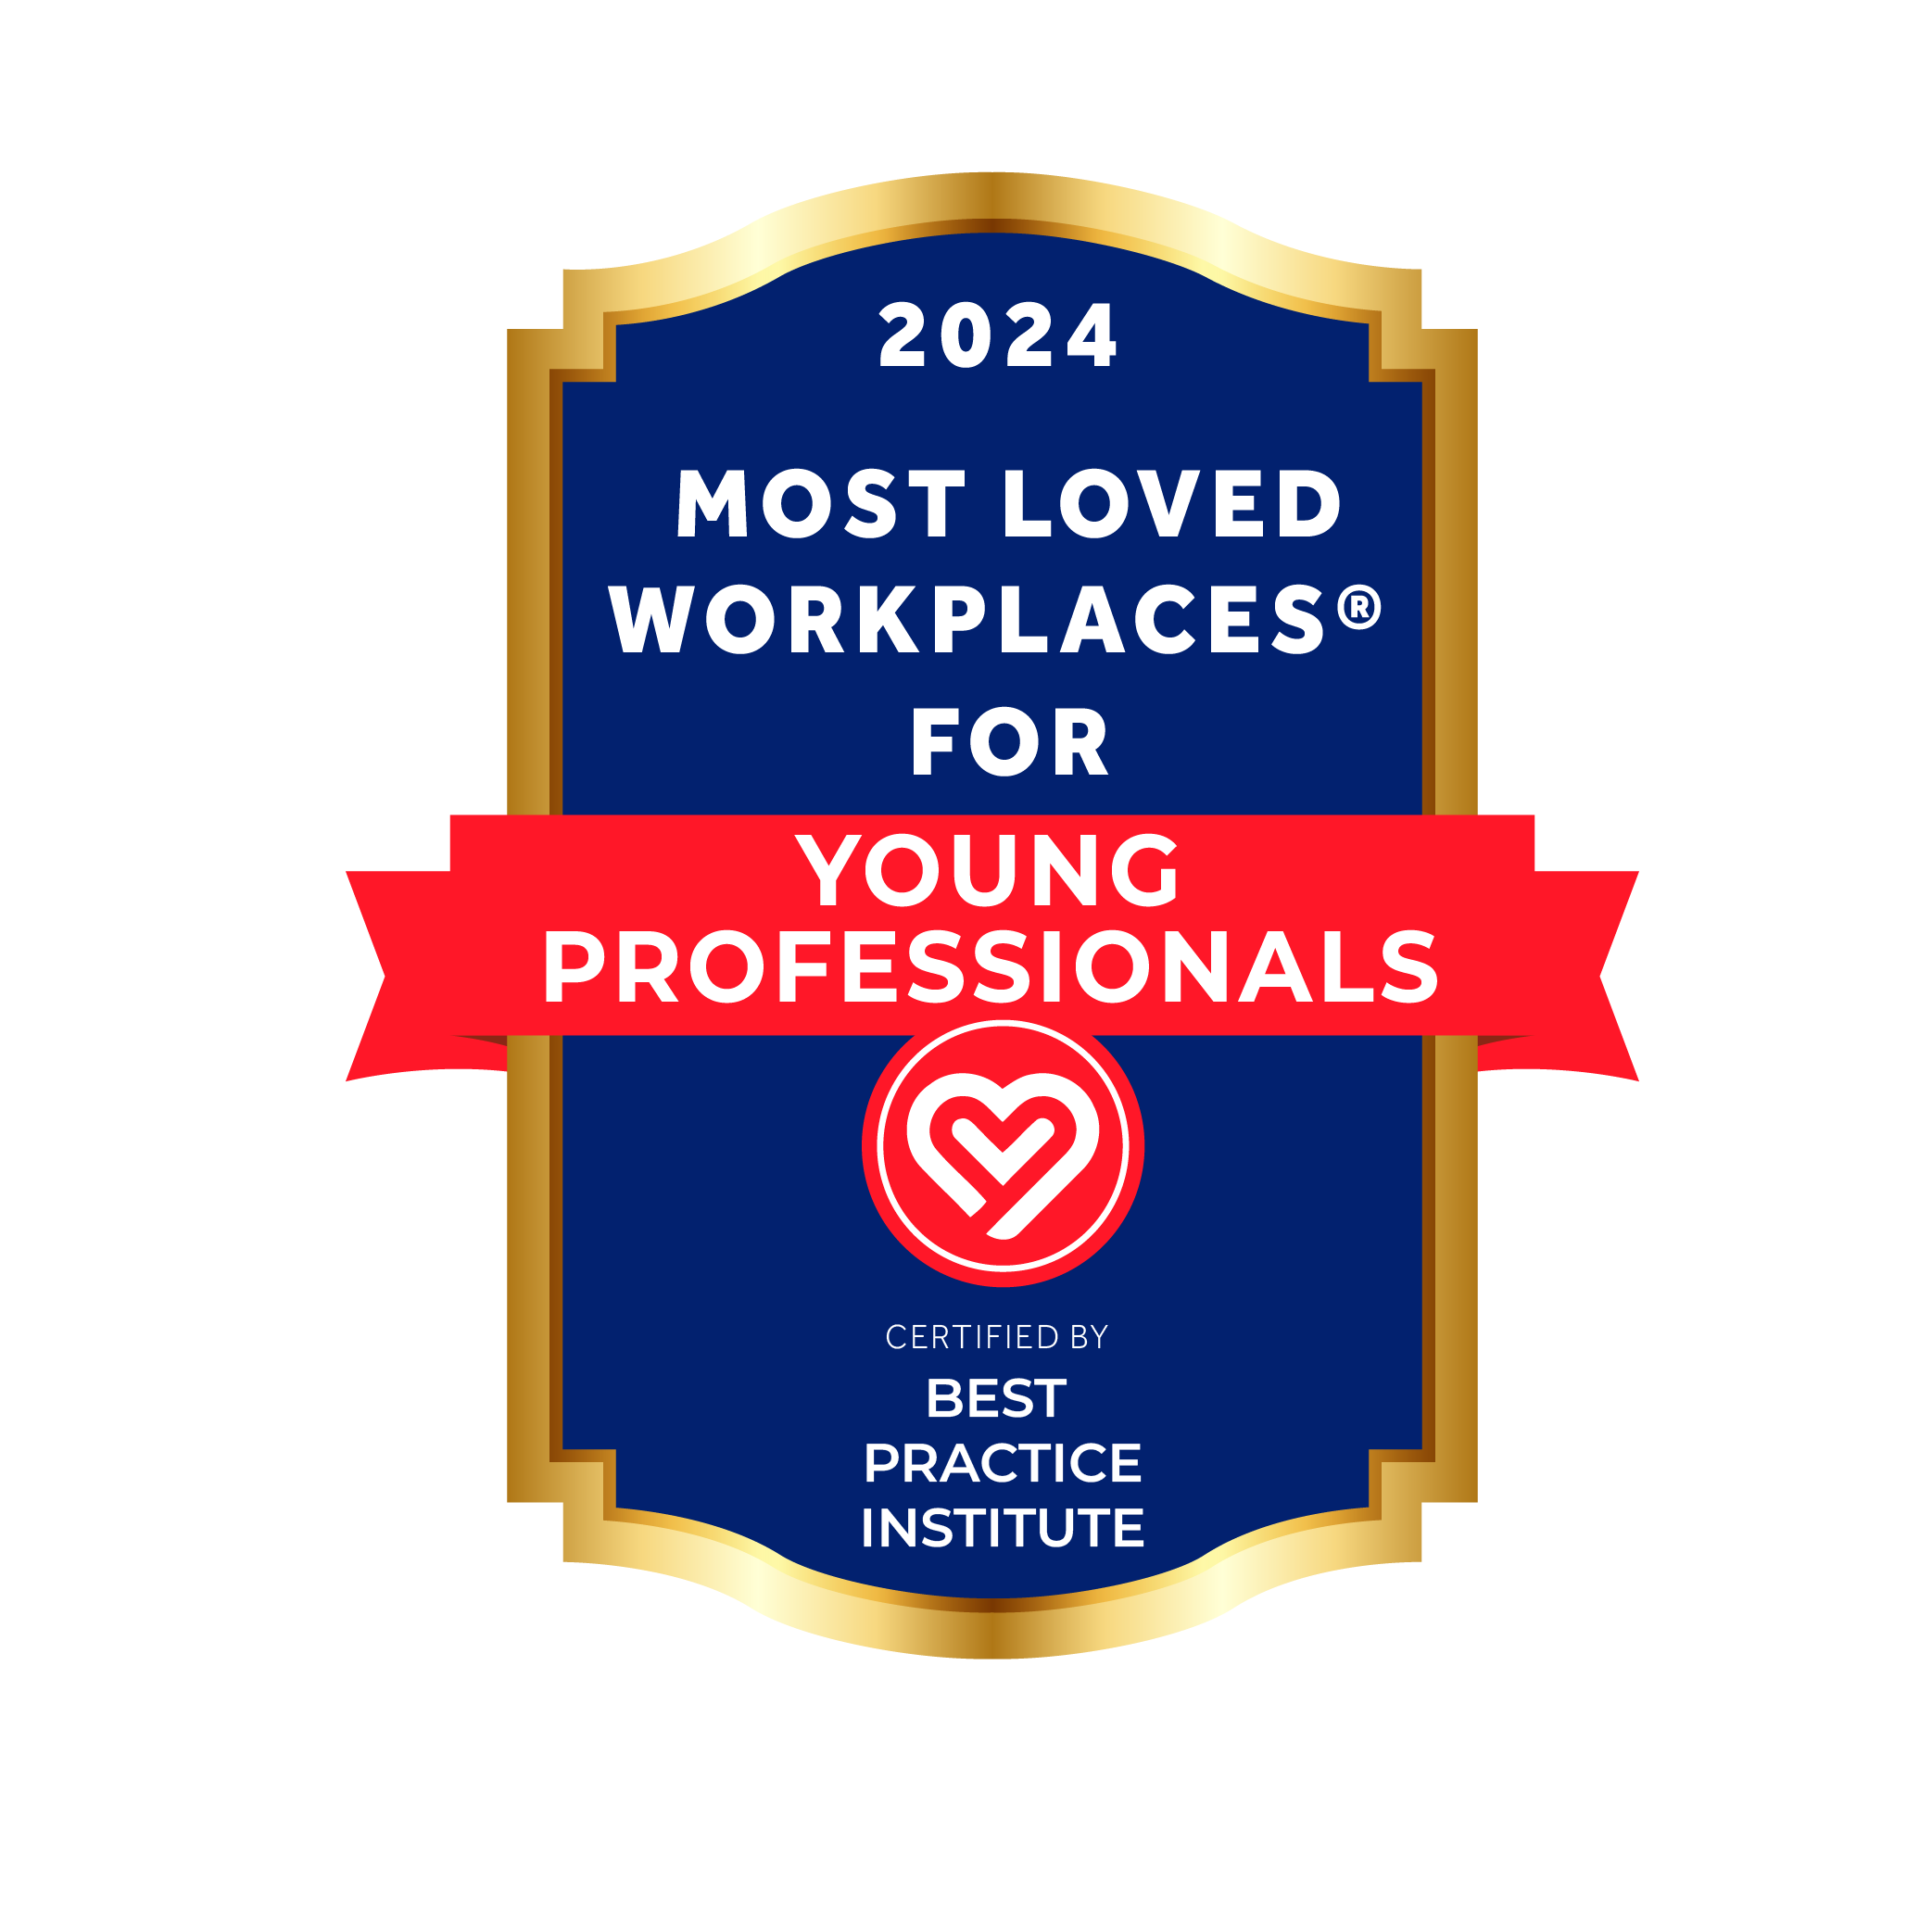 KnowBe4 Recognized in Newsweek’s List of the Top Most Loved Workplaces® 2024 for Young Professionals and Other Categories